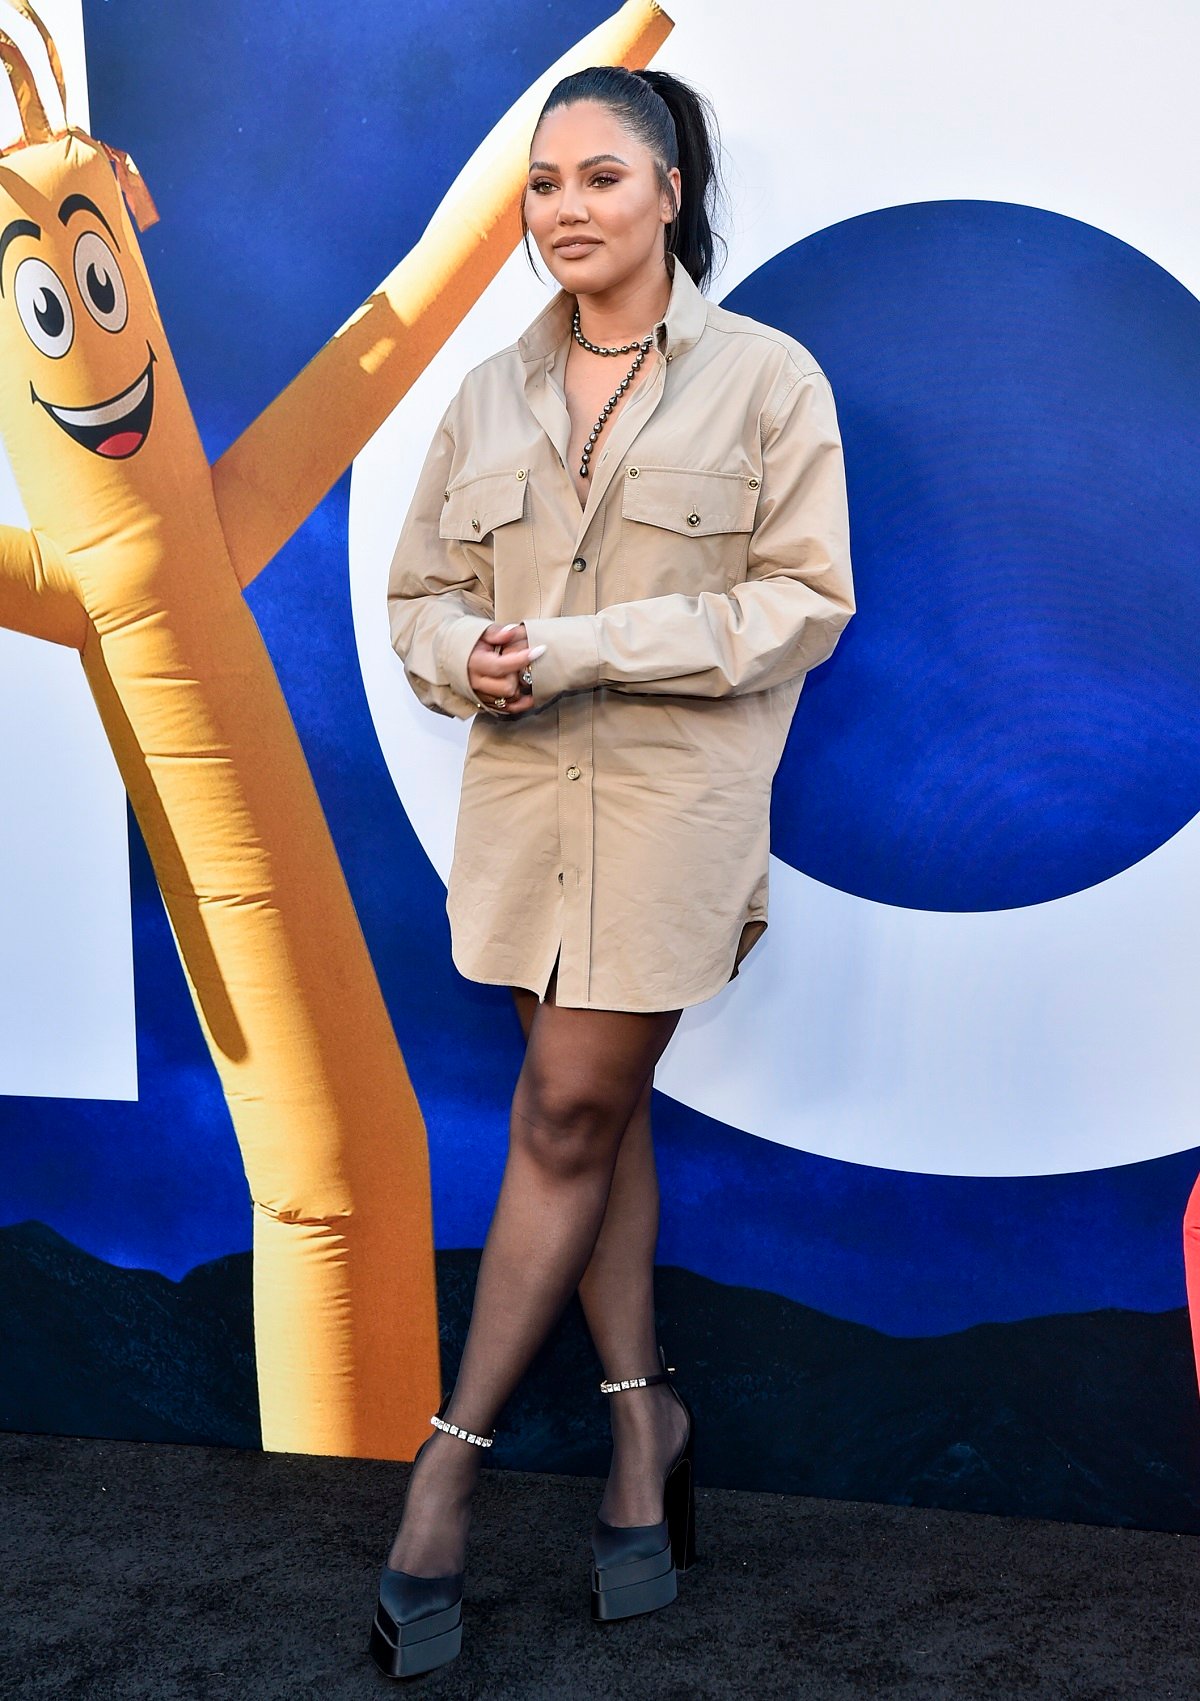 Ayesha Curry poses for a photo on the red carpet at the world premiere of Universal Pictures' NOPE